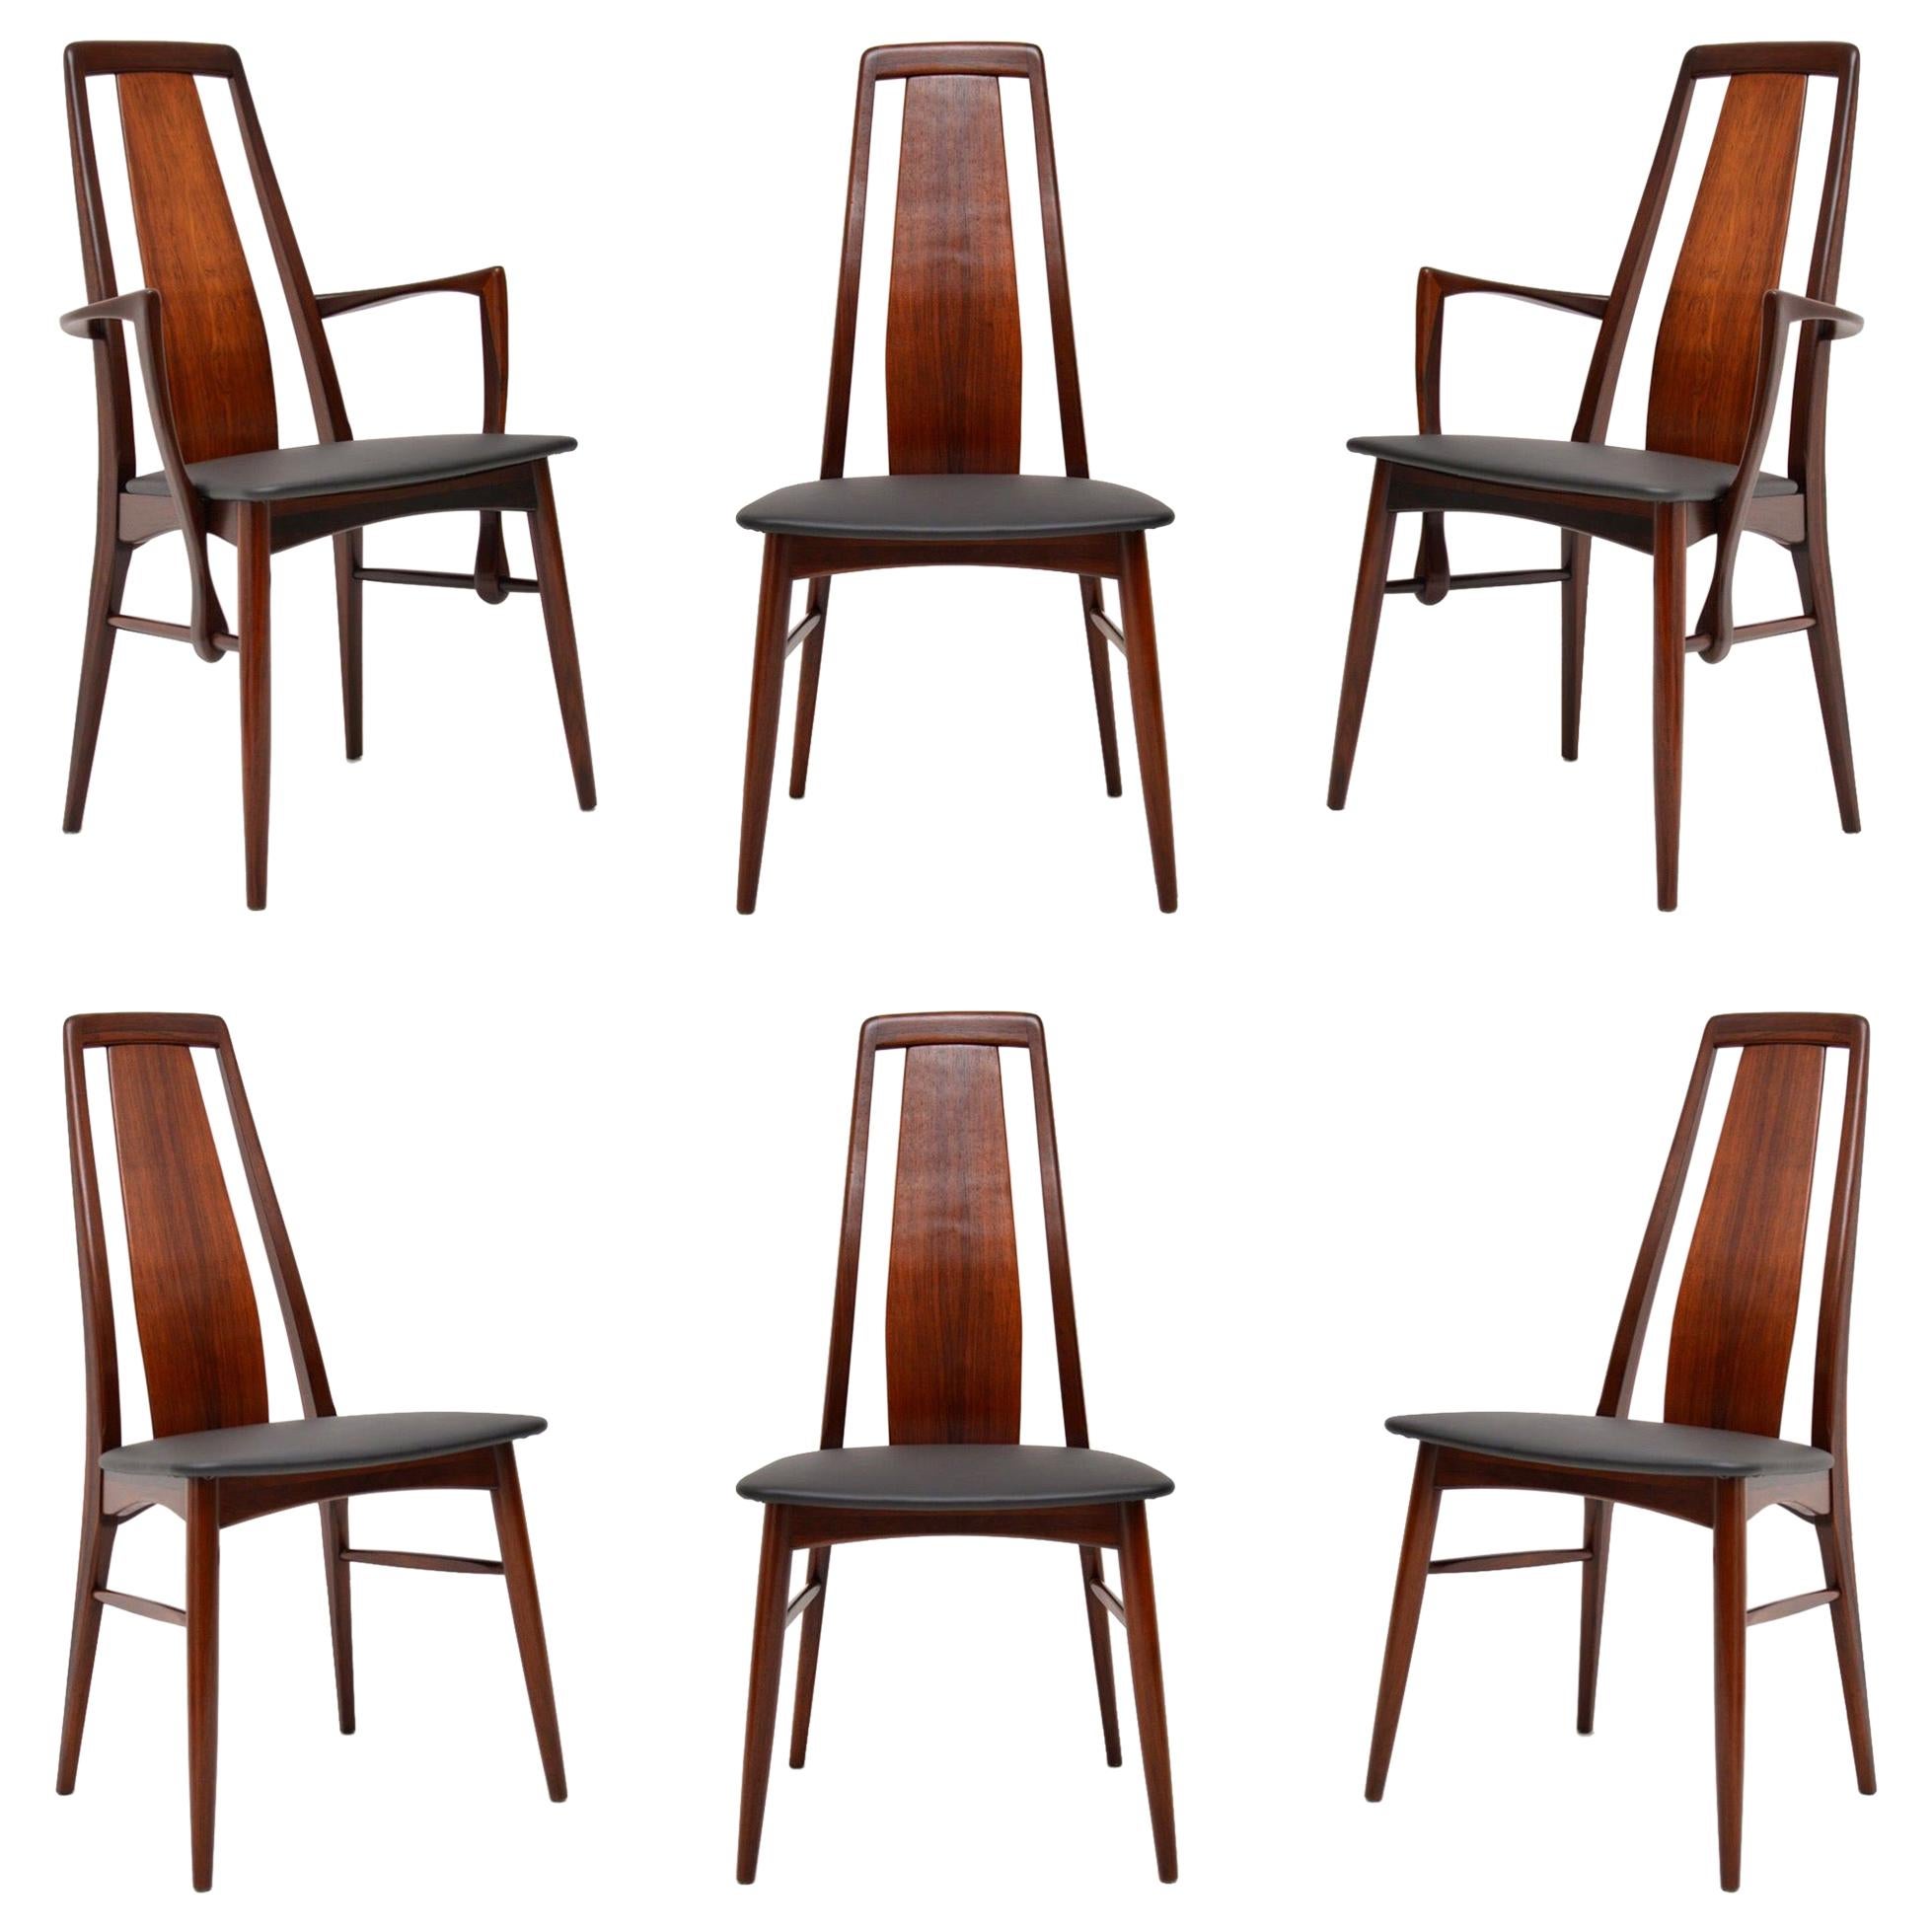 1960’s Set of 6 Danish Dining Chairs by Niels Koefoed